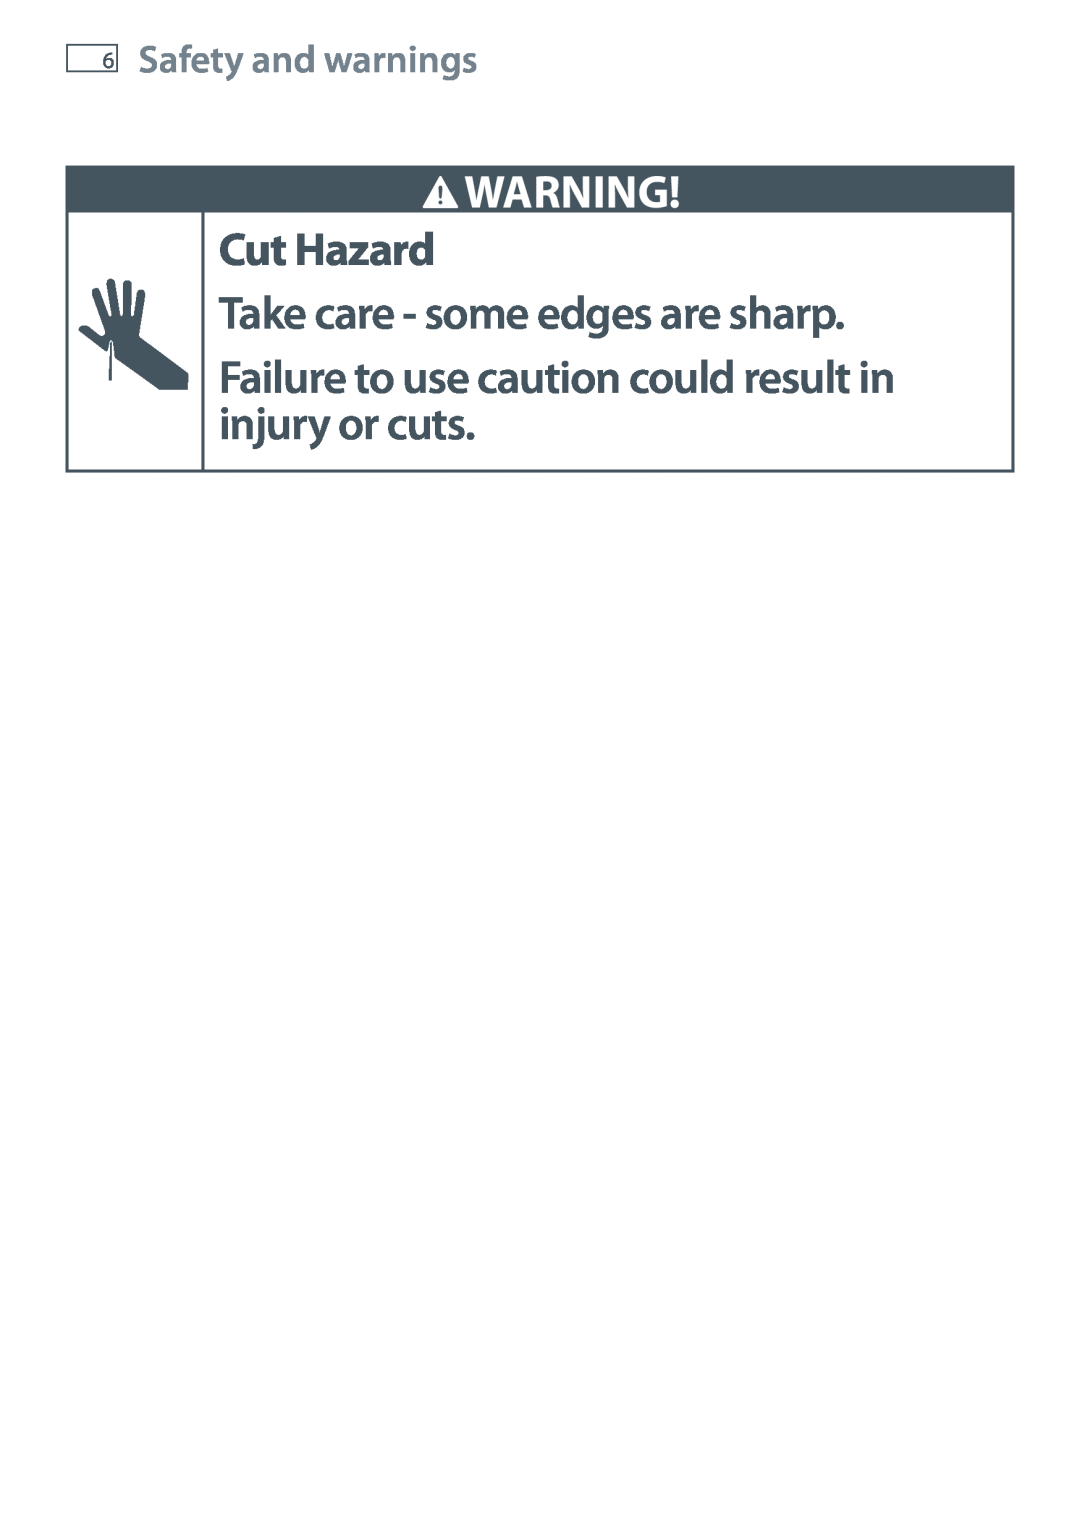 Fisher & Paykel OB60SL7 Cut Hazard Take care - some edges are sharp, Failure to use caution could result in injury or cuts 